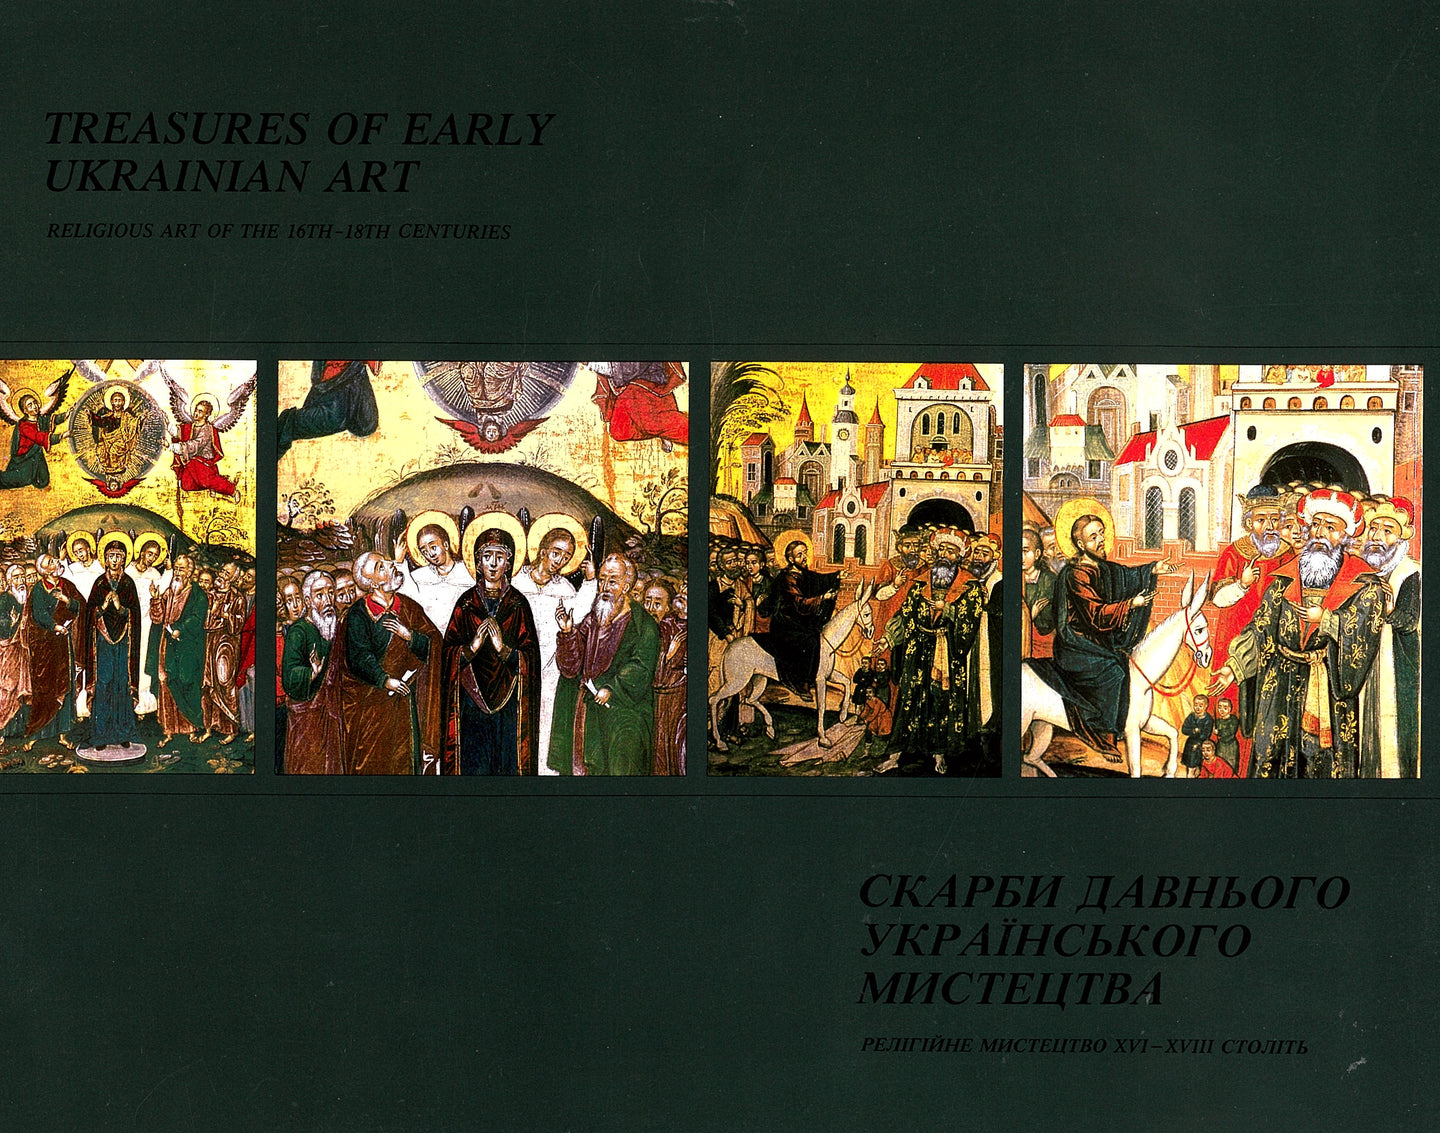 Treasures of Early Ukrainian Art: Religious Art of the 16th-18th Centuries